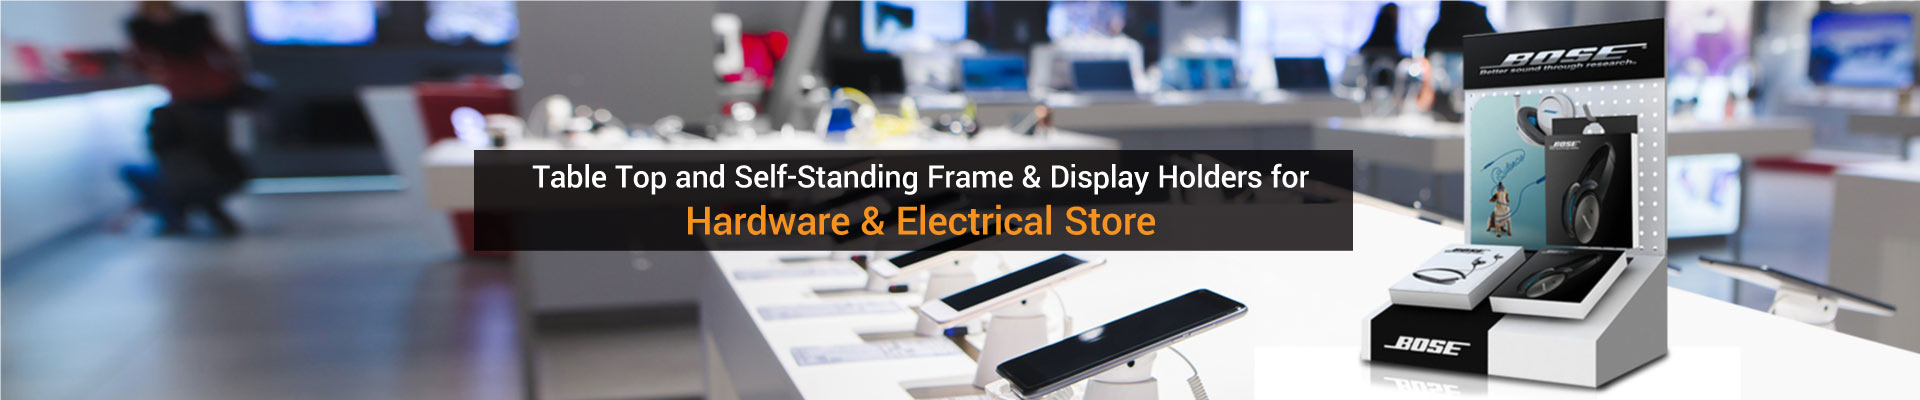 Hardware & Electrical Store